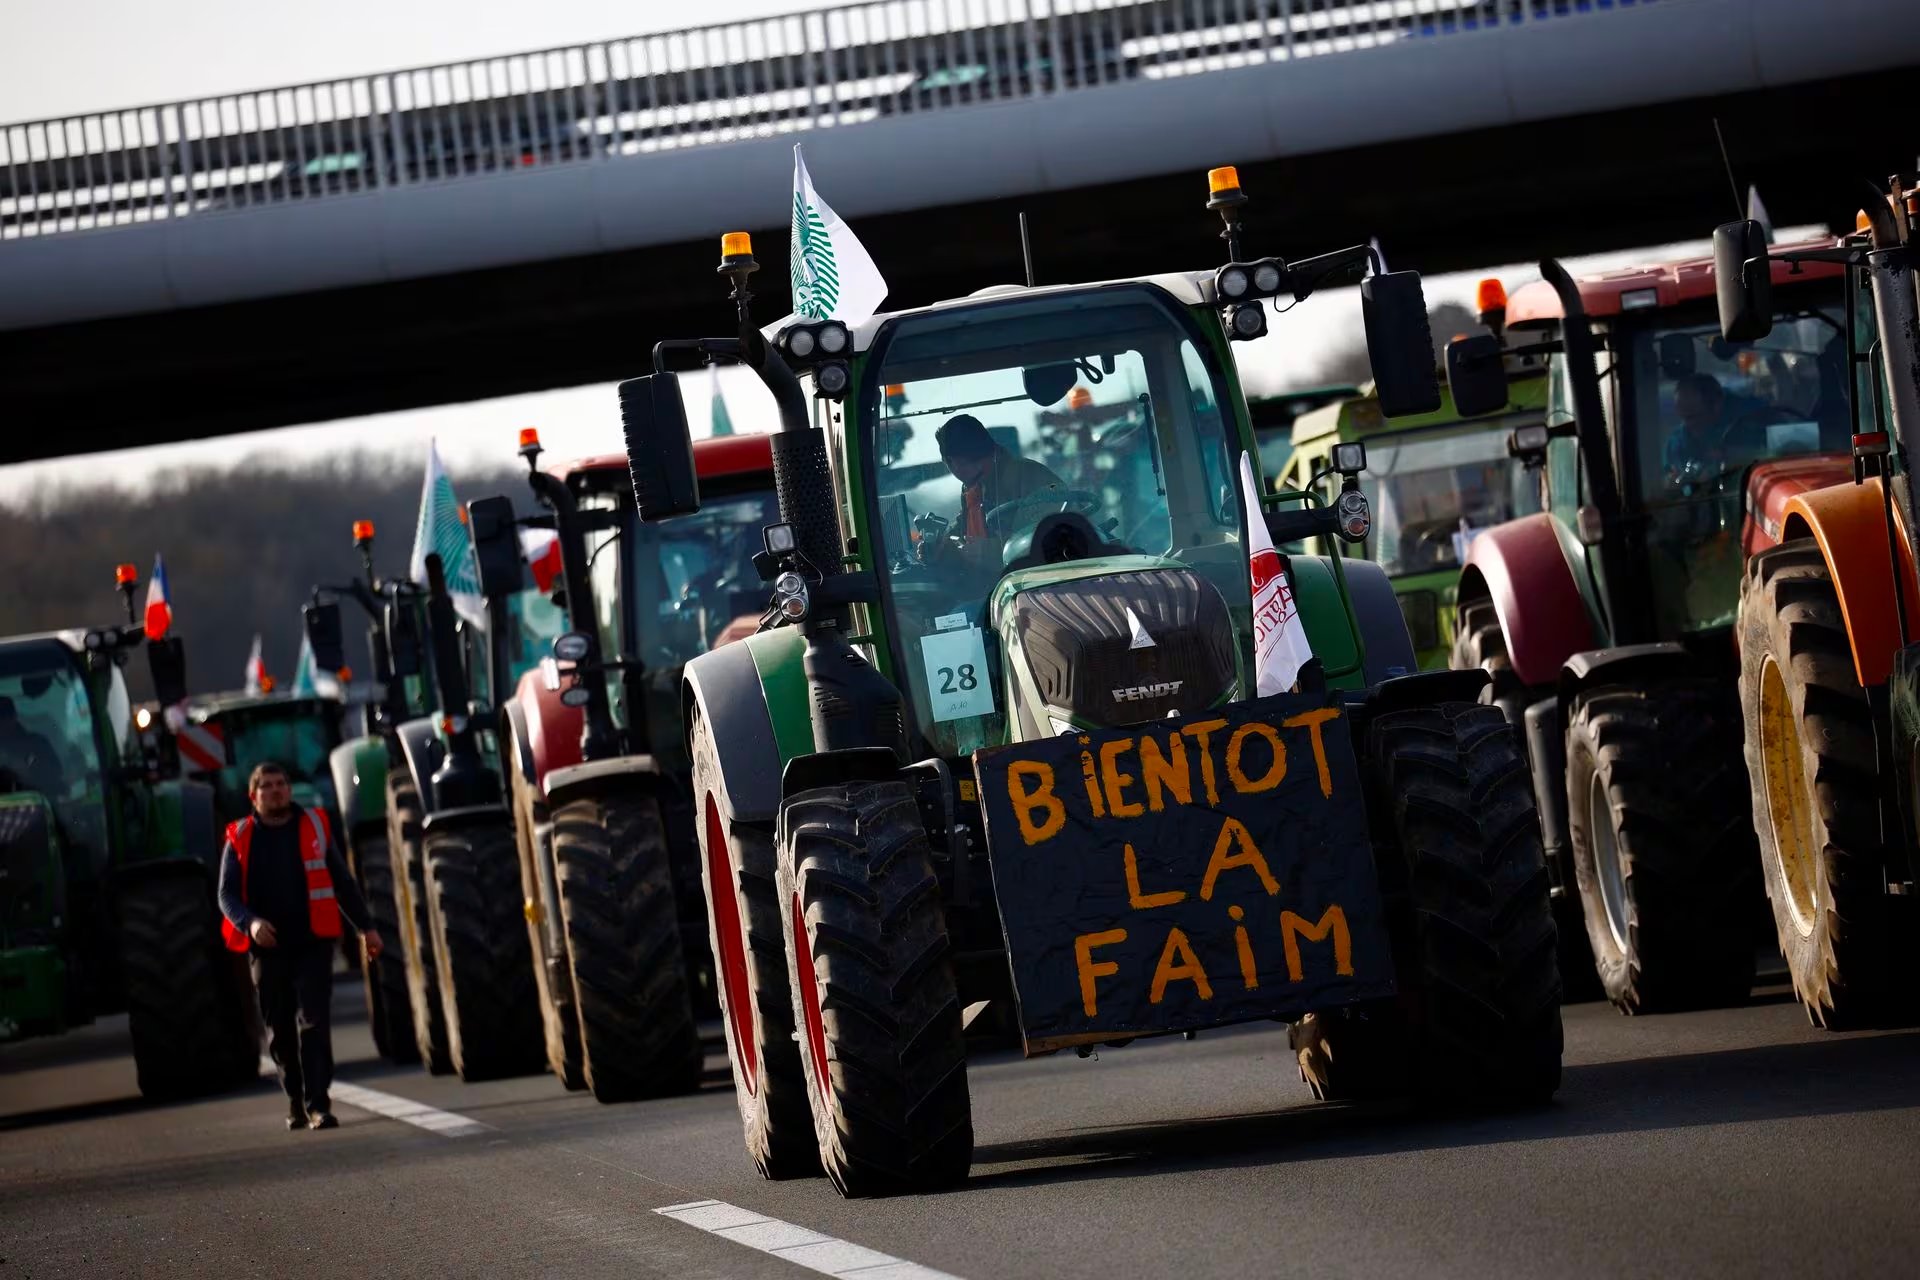 French farmers drive their tractors on a highway as they protest over price pressures, taxes and green regulation, grievances shared by farmers across Europe, in Longvilliers, near Paris, France, January 29. The placard reads 'Soon hunger.'